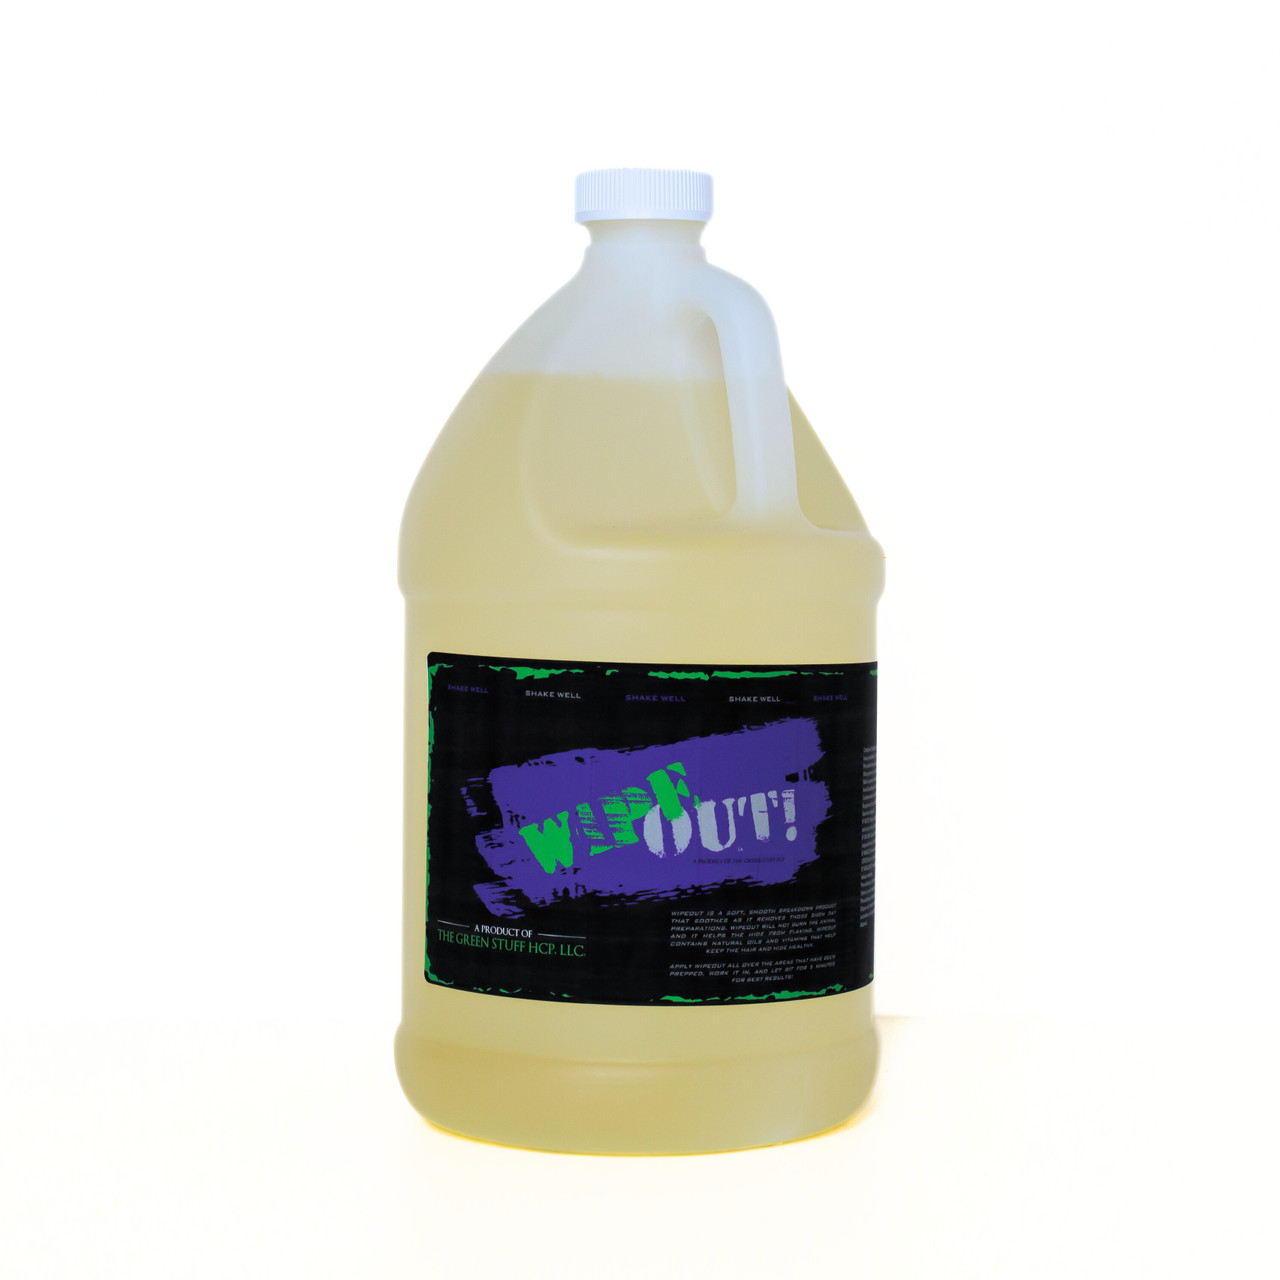 Wipeout - The Green Stuff Daily Hair Care Products LLC